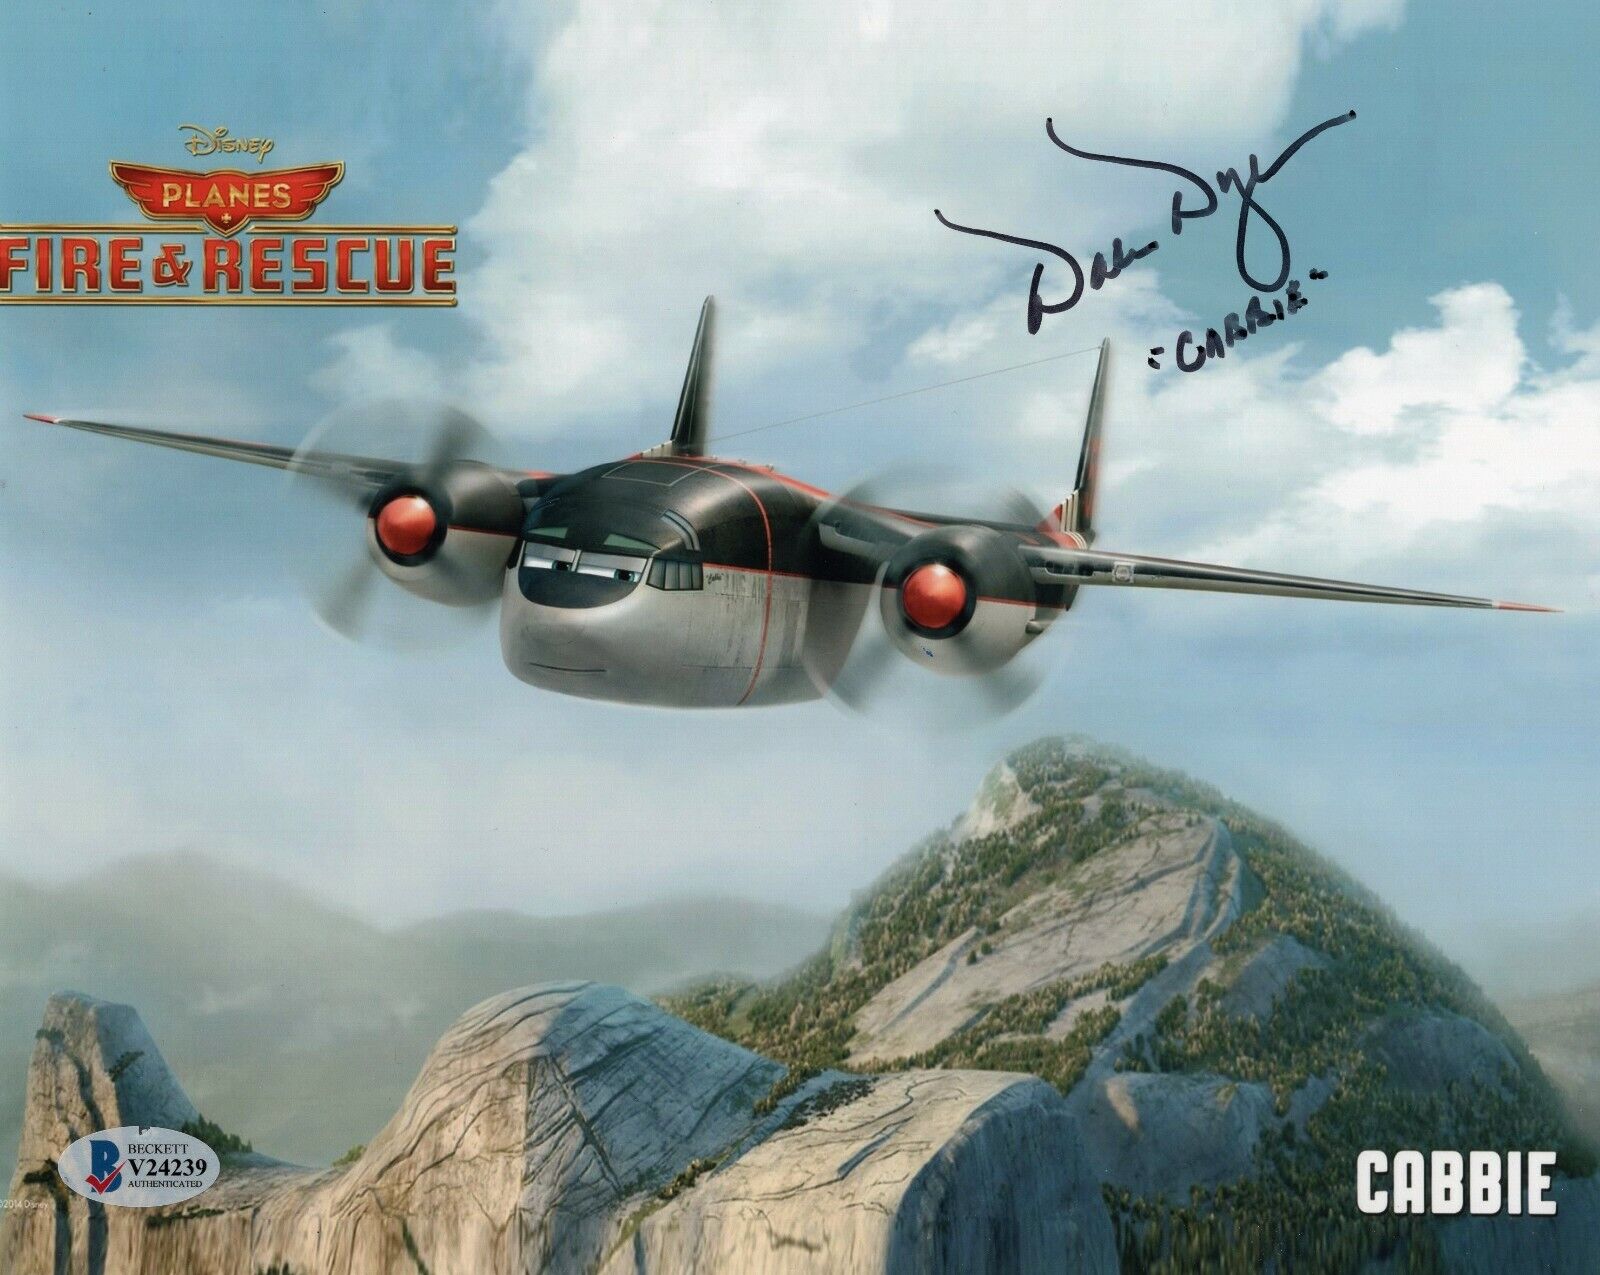 Dale Dye Signed Disney Planes Movie 8x10 Photo Poster painting w/Beckett COA V24239 Cabbie